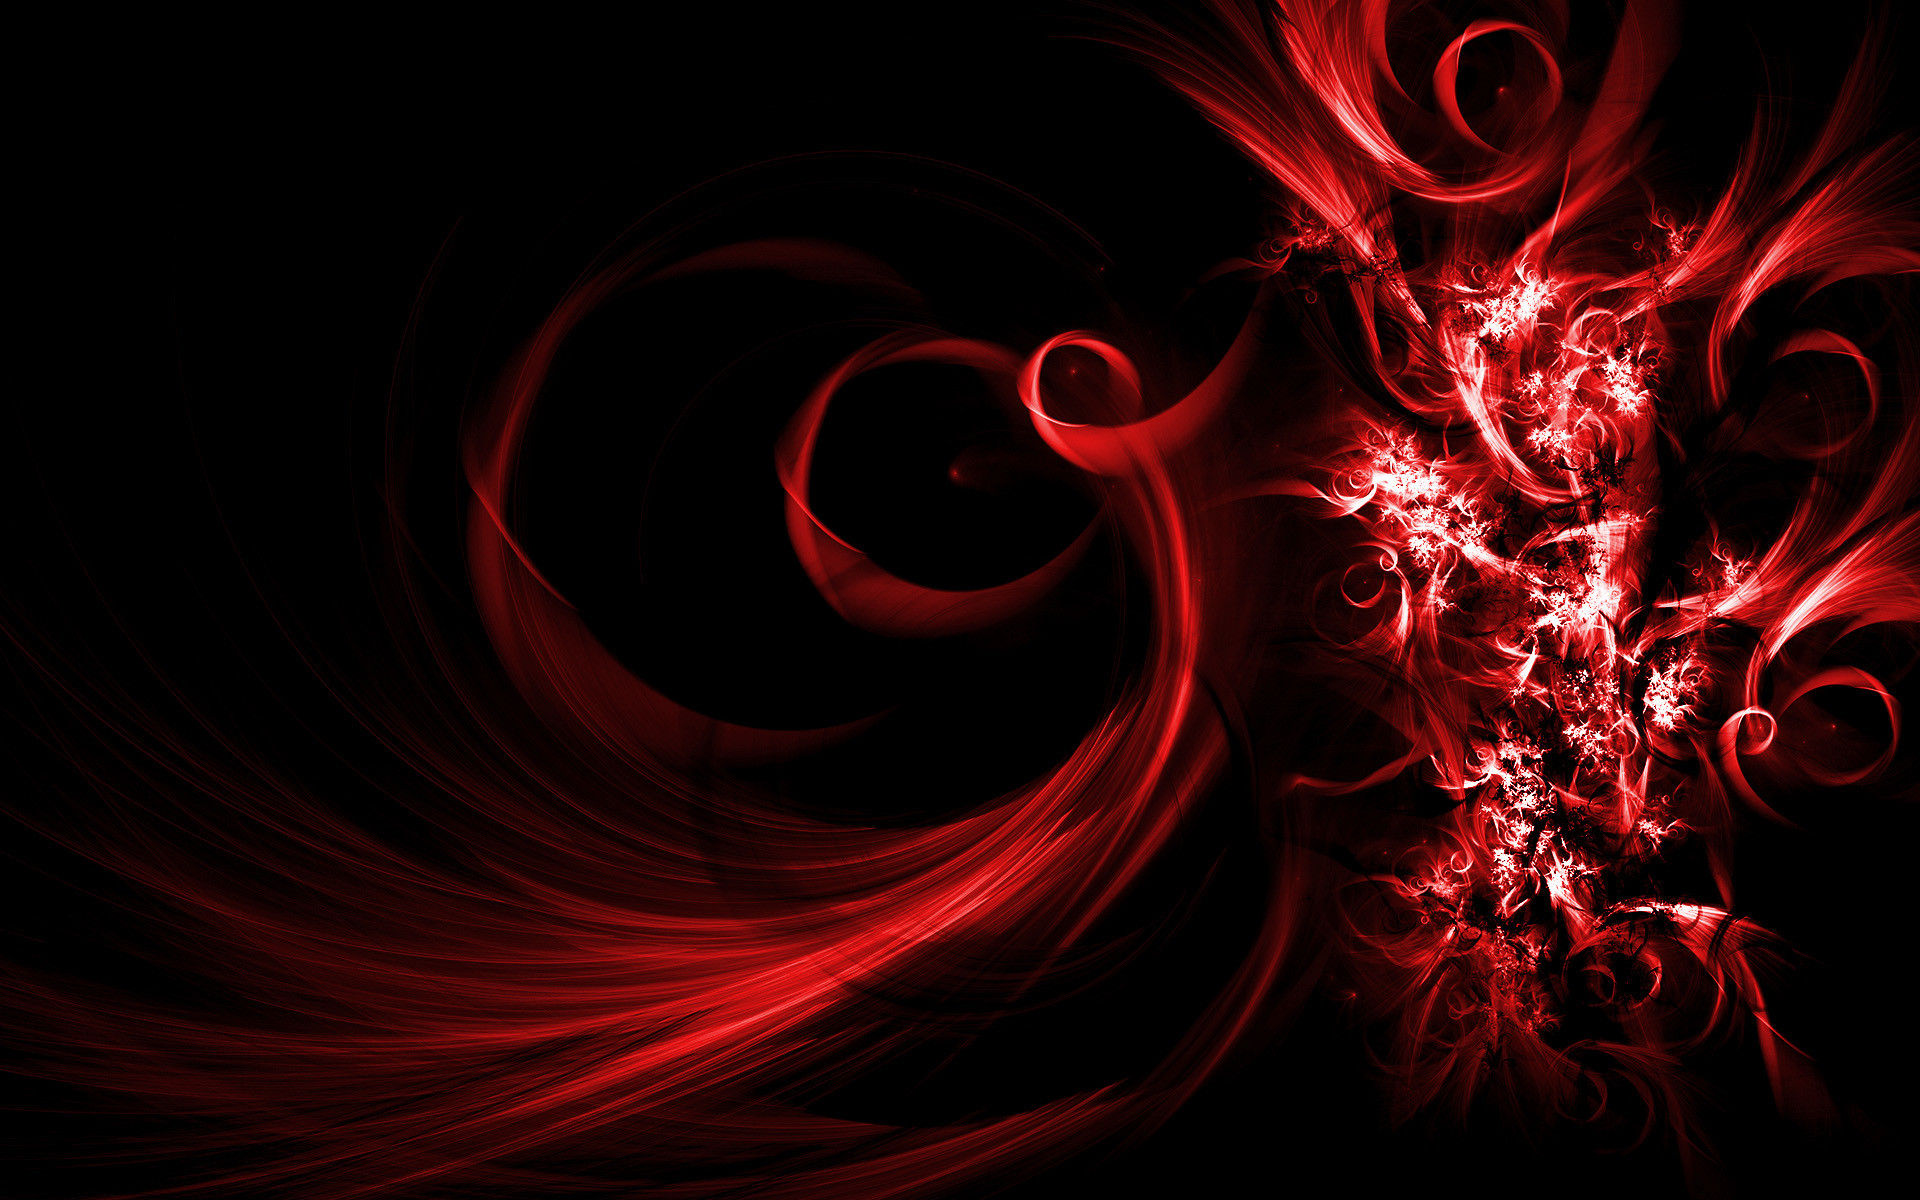 1920x1200 File Name : Abstract Red Wallpaper HD 1920Ã1200